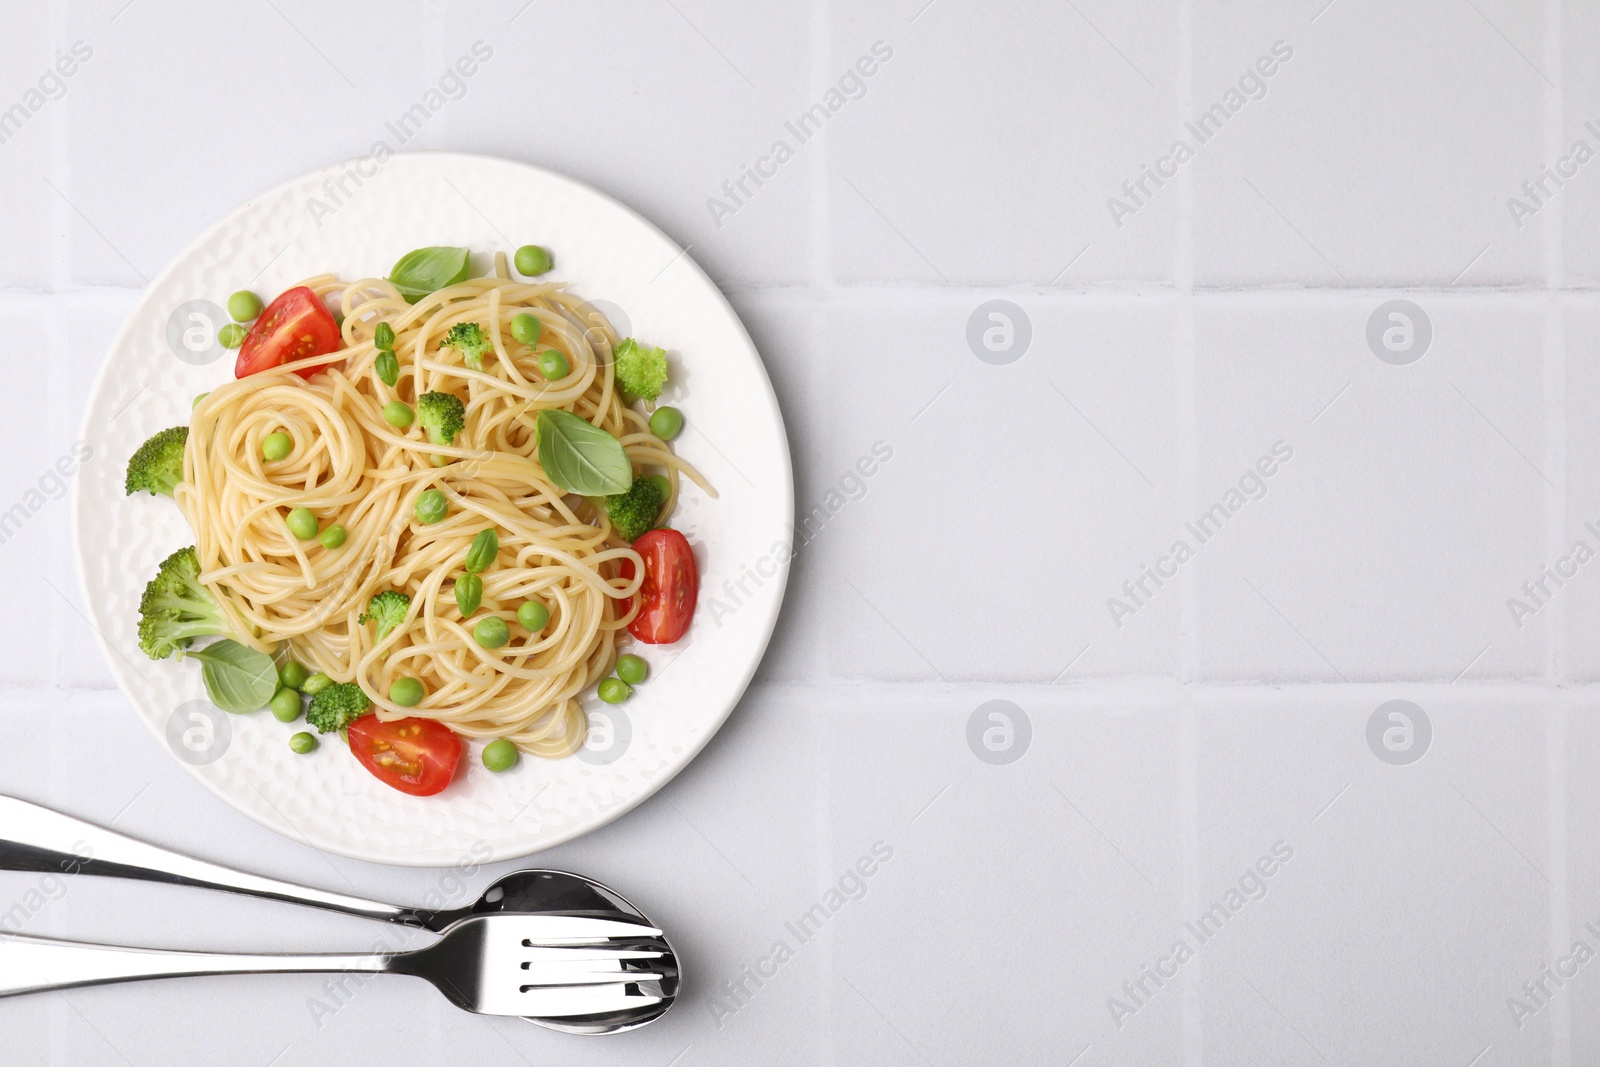 Photo of Plate of delicious pasta primavera and cutlery on white tiled table, flat lay. Space for text